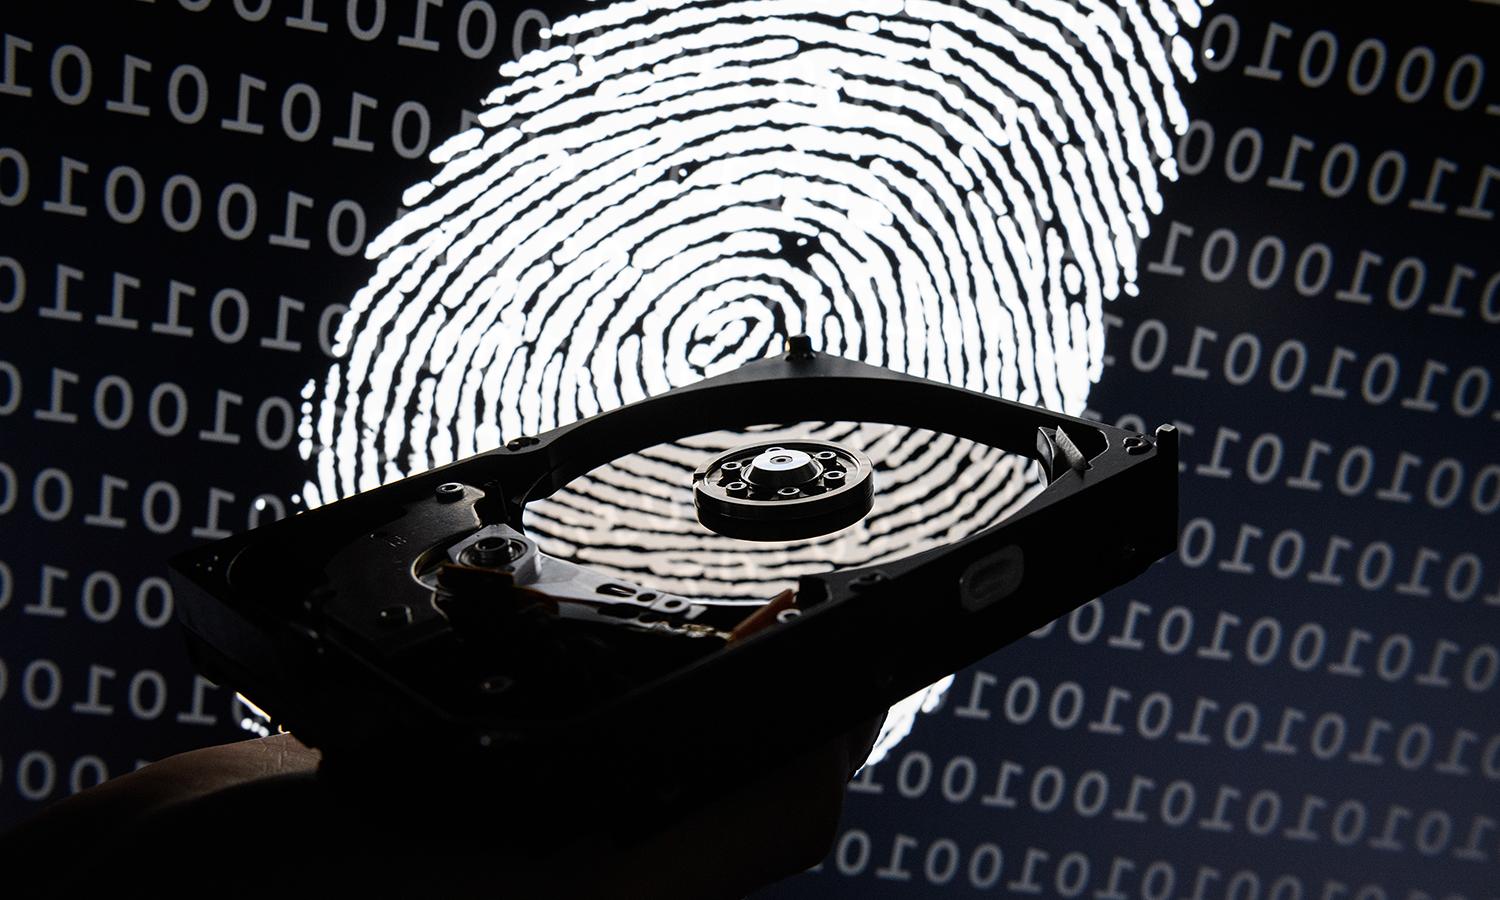 A hard drive is seen in the light of a projection of a thumbprint. (Photo by Leon Neal/Getty Images)